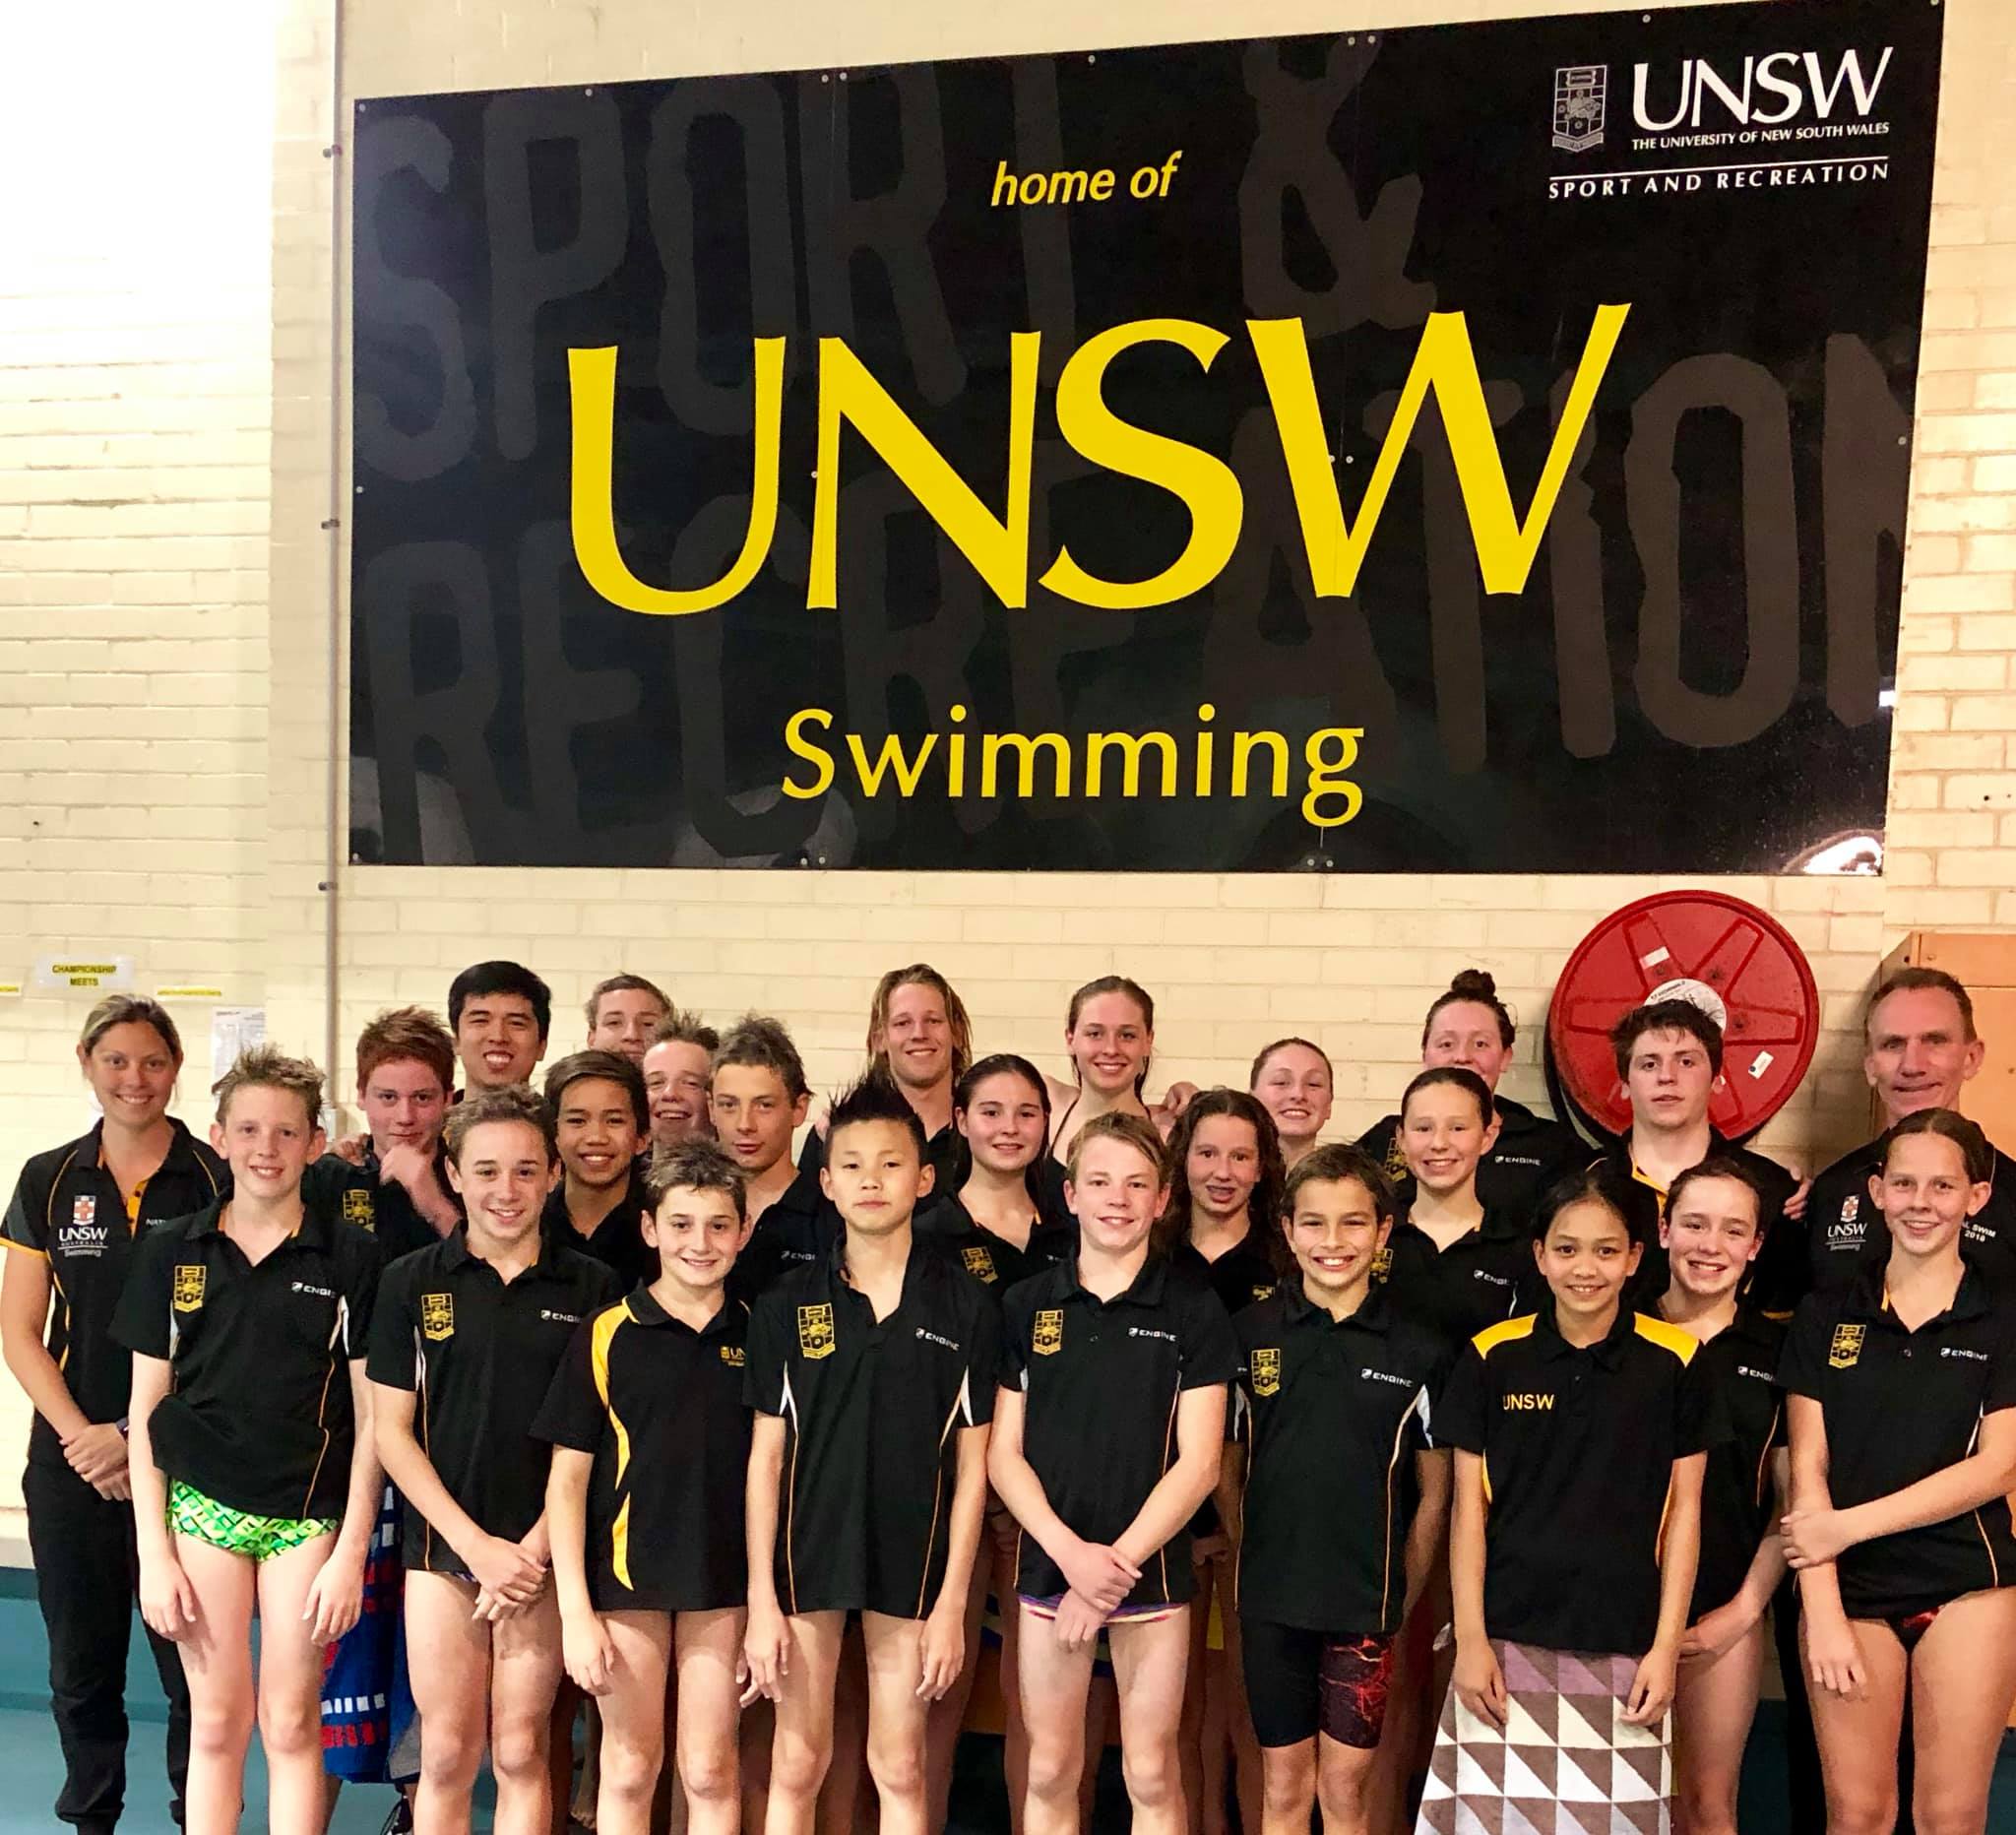 The UNSW Swim Club are now ranked third in NSW.